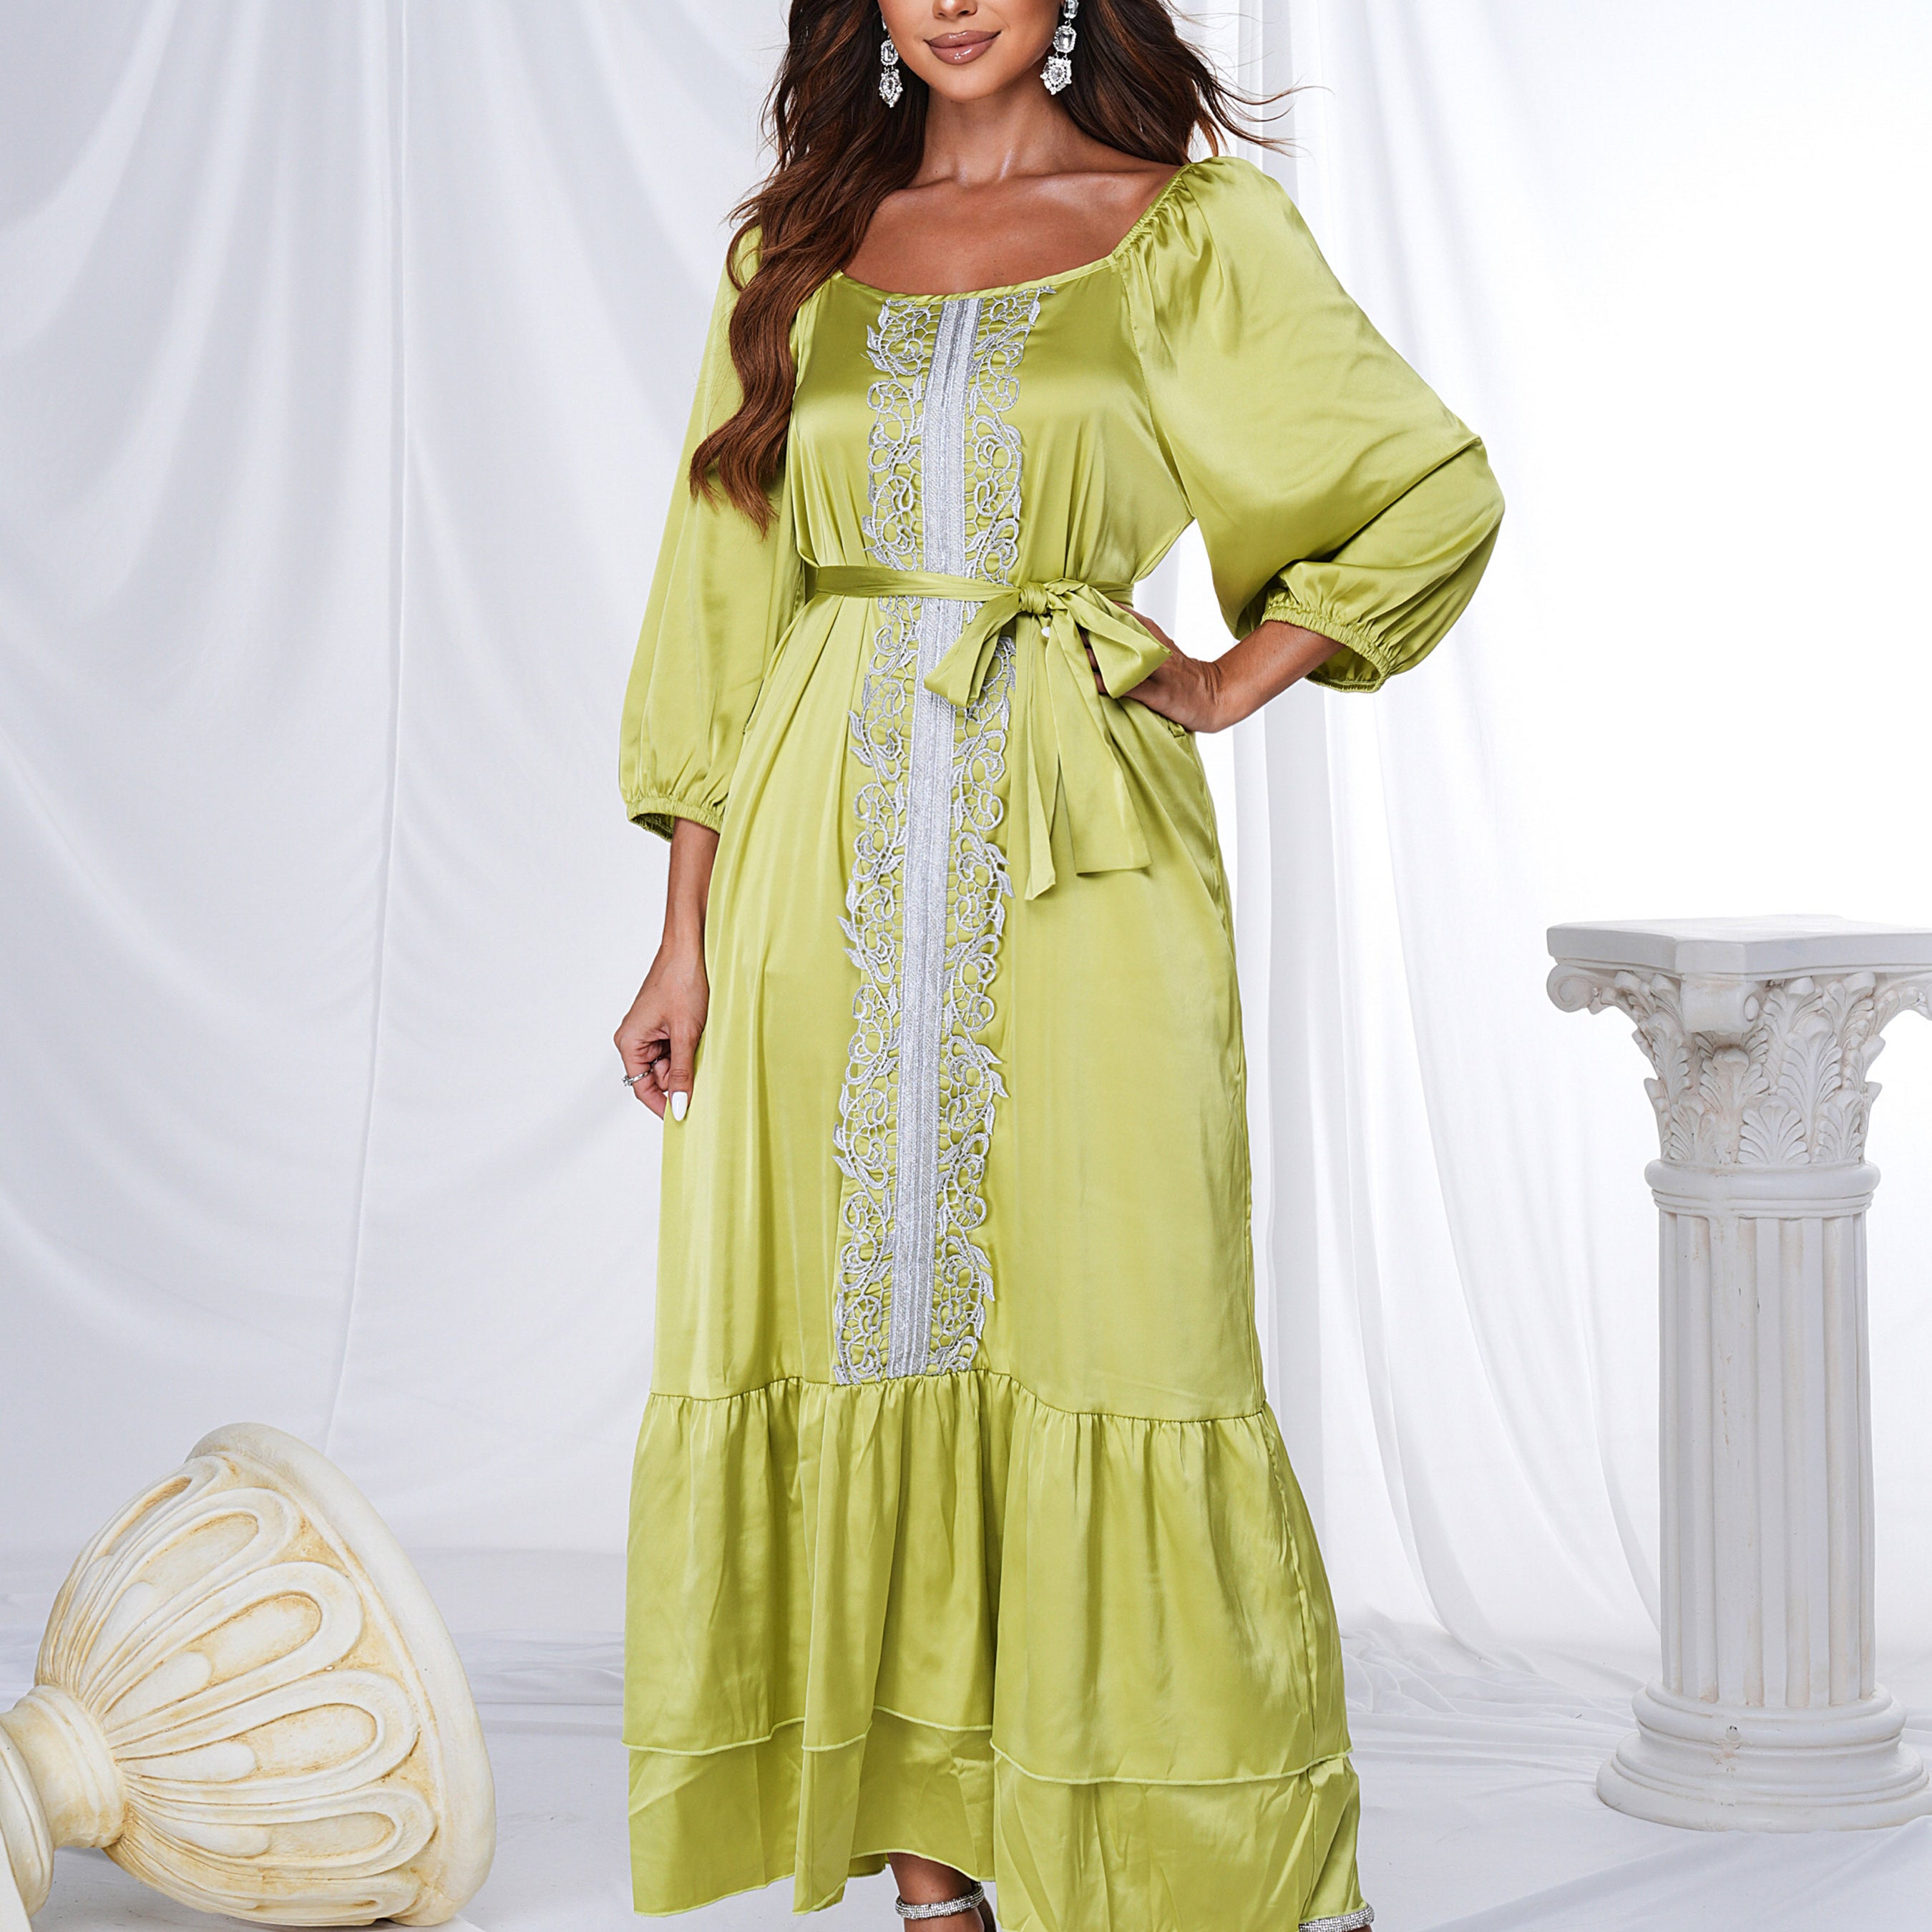 Embroidered Satin Ruffled Loose Dress ME00196